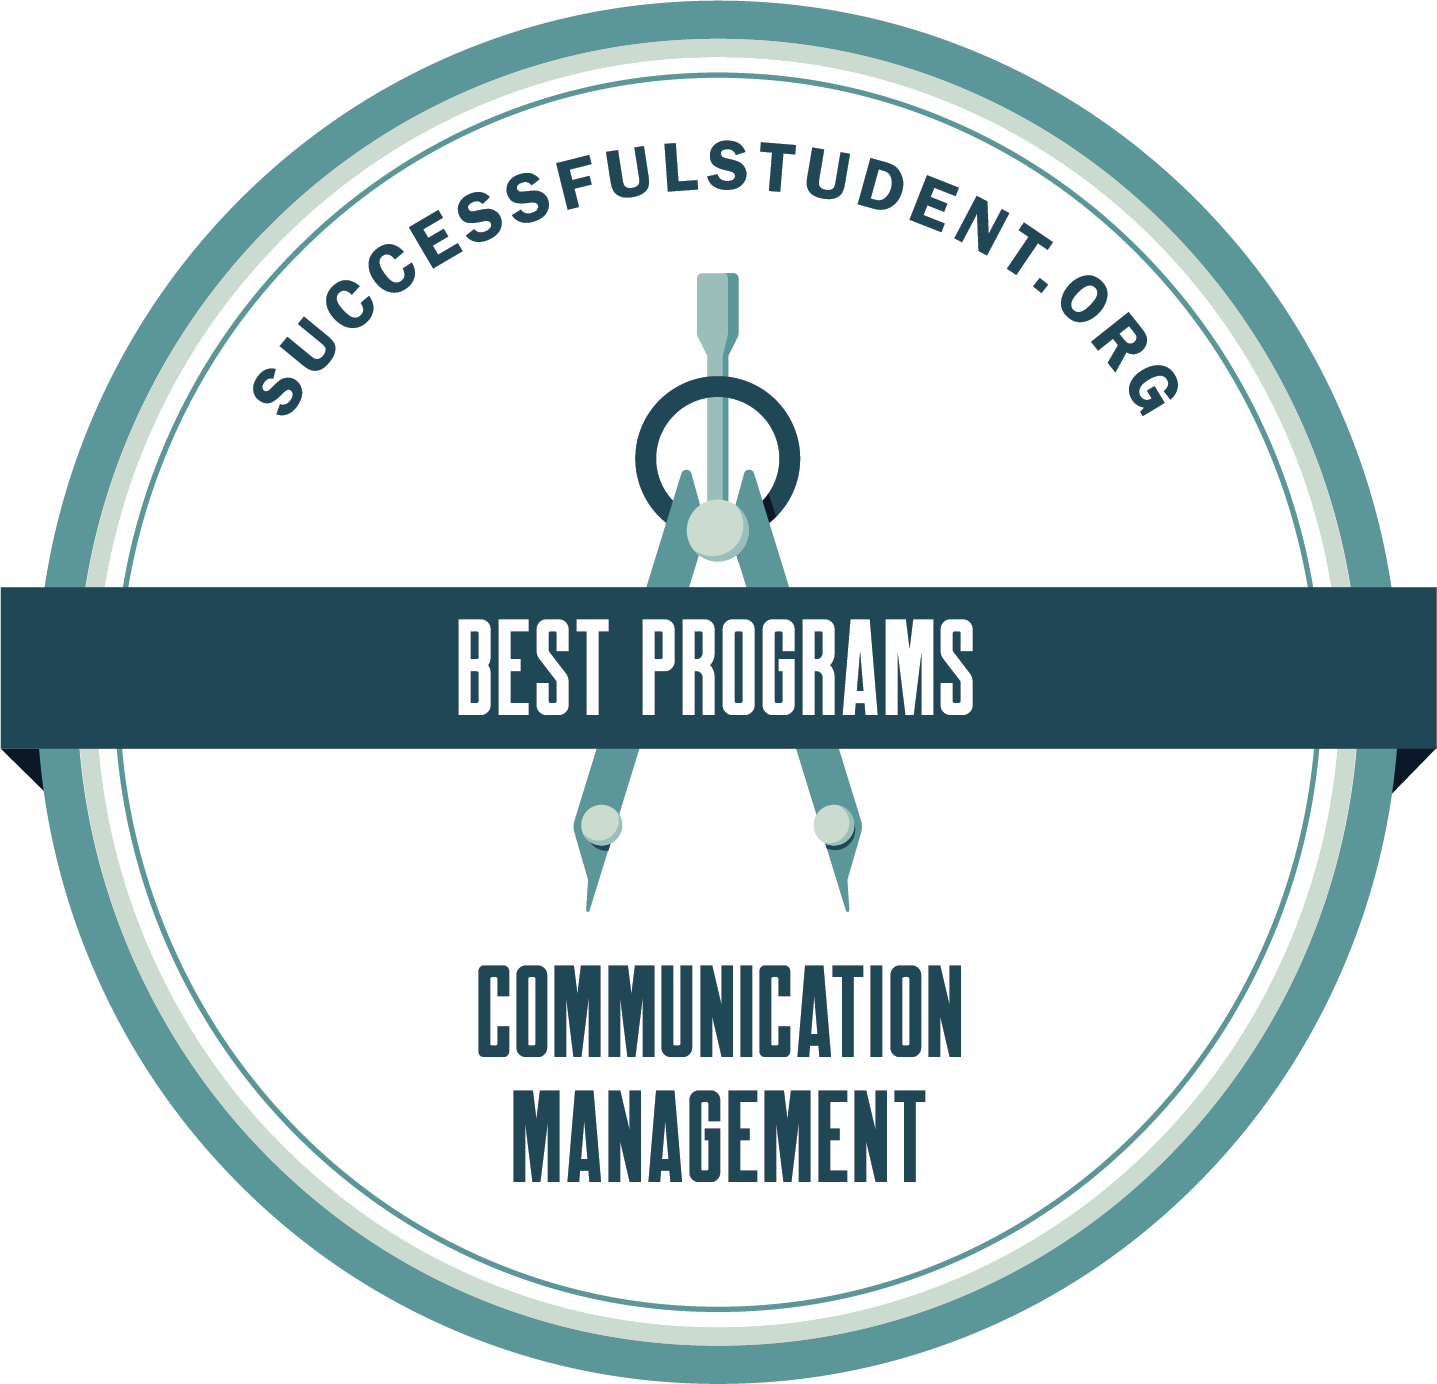 The Best Master’s Degrees in Communication Management's Badge